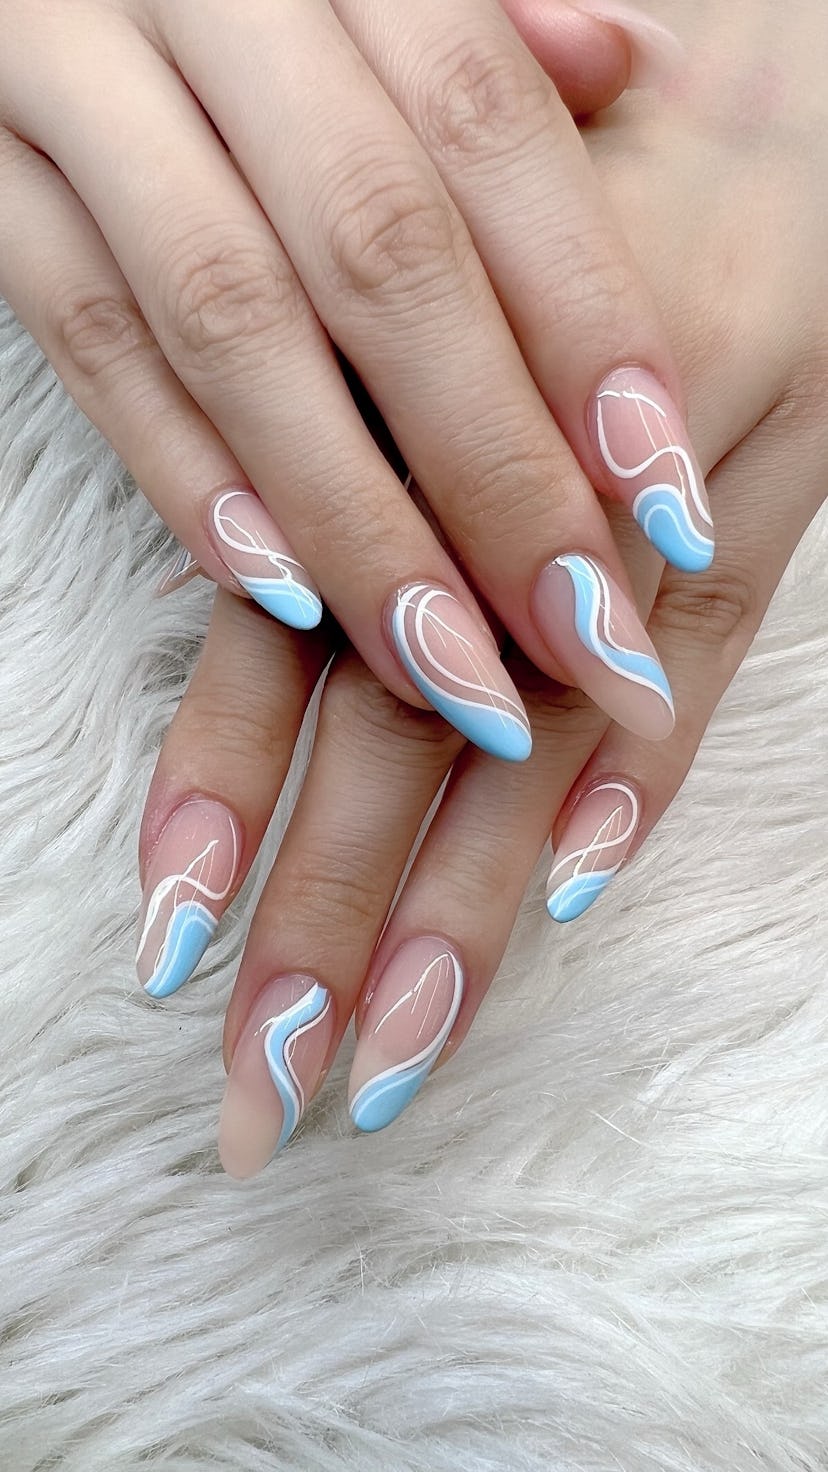 Swirl nails with abstract art in blue and white, one of the biggest nail trends for 2023.